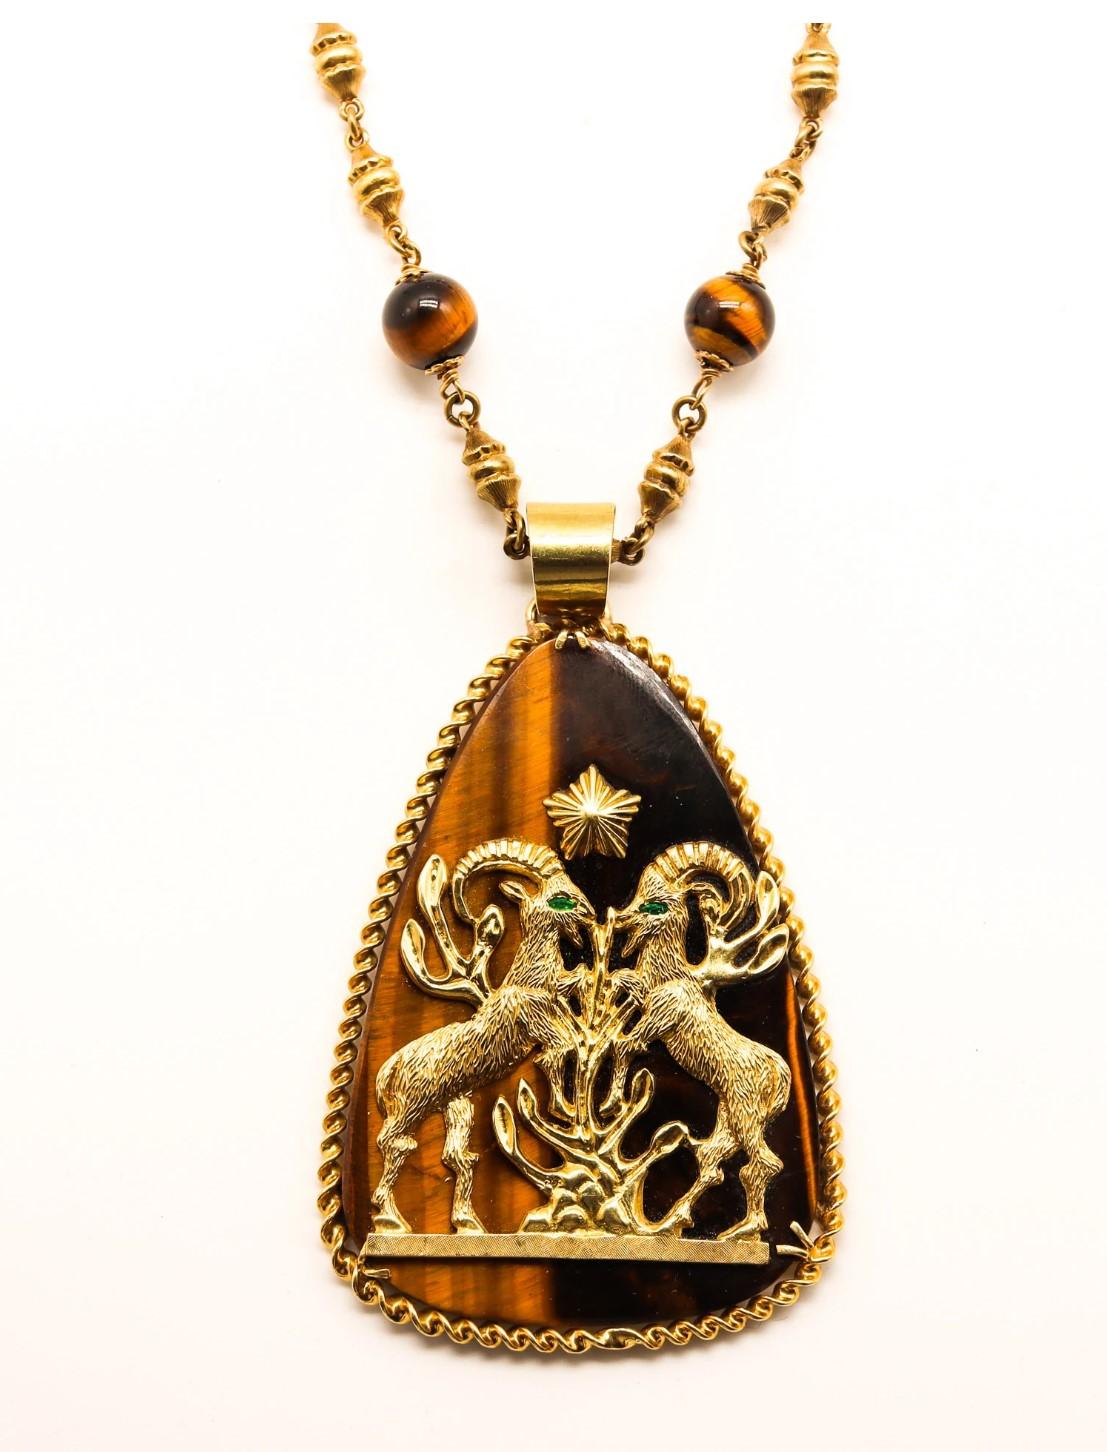 Capricorn Zodiac Necklace Sautoir.

Beautiful highly decorated piece, created in Vicenza Italy, back in the 1960's. This long sautoir necklace was carefully crafted in solid yellow gold of 18 karats, with highly textured details. It is suited with a